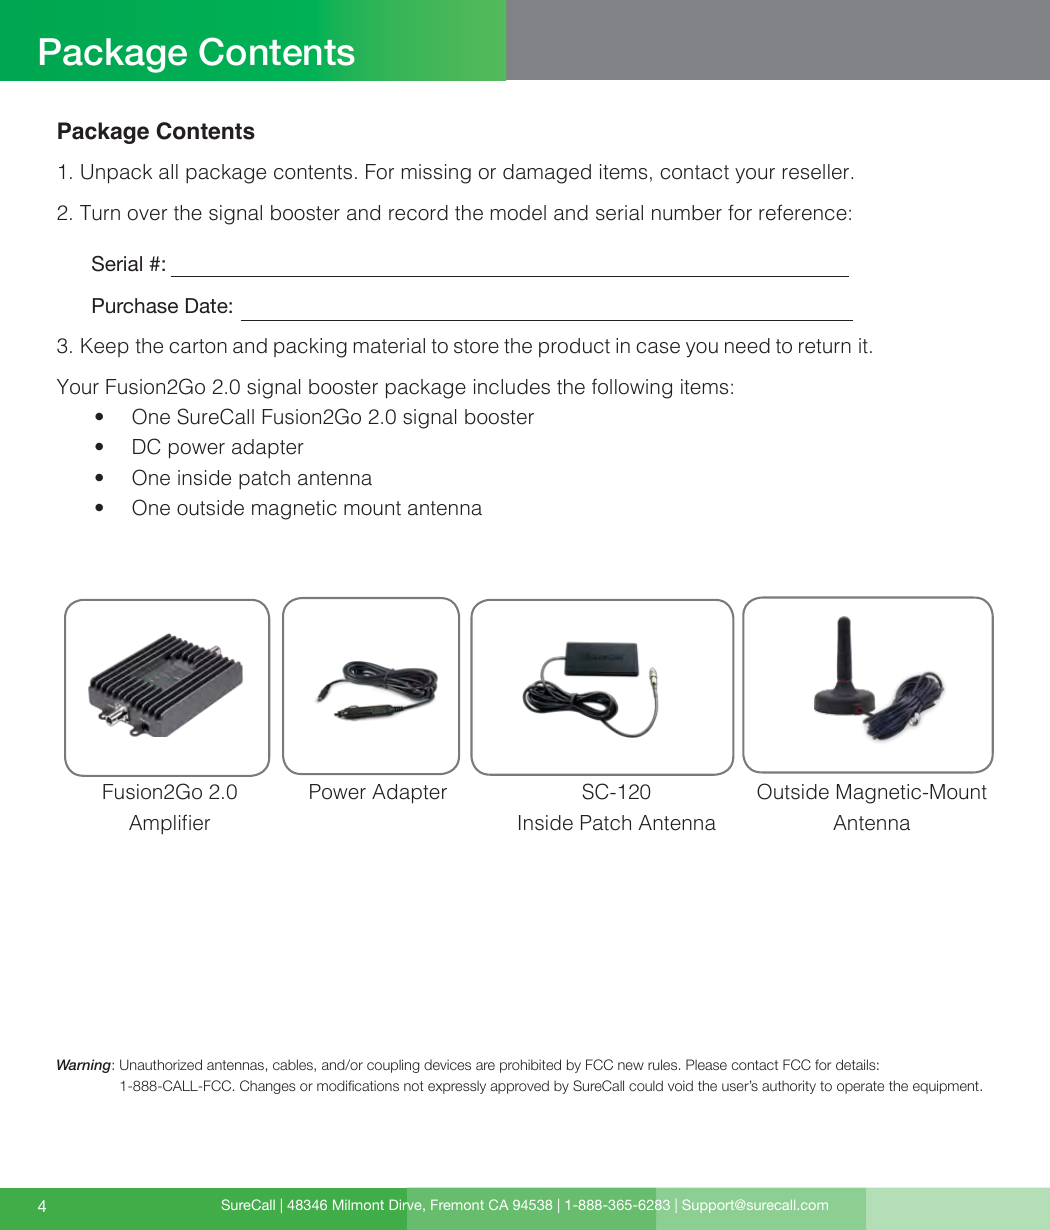 SureCall | 48346 Milmont Dirve, Fremont CA 94538 | 1-888-365-6283 | Support@surecall.com4Package ContentsPackage Contents1. Unpack all package contents. For missing or damaged items, contact your reseller.2. Turn over the signal booster and record the model and serial number for reference:      Serial #:          Purchase Date:  3. Keep the carton and packing material to store the product in case you need to return it. Your Fusion2Go 2.0 signal booster package includes the following items:•  One SureCall Fusion2Go 2.0 signal booster•  DC power adapter•  One inside patch antenna•  One outside magnetic mount antennaFusion2Go 2.0  AmplierSC-120 Inside Patch AntennaWarning:   Unauthorized antennas, cables, and/or coupling devices are prohibited by FCC new rules. Please contact FCC for details: 1-888-CALL-FCC. Changes or modications not expressly approved by SureCall could void the user’s authority to operate the equipment.Power Adapter Outside Magnetic-Mount Antenna